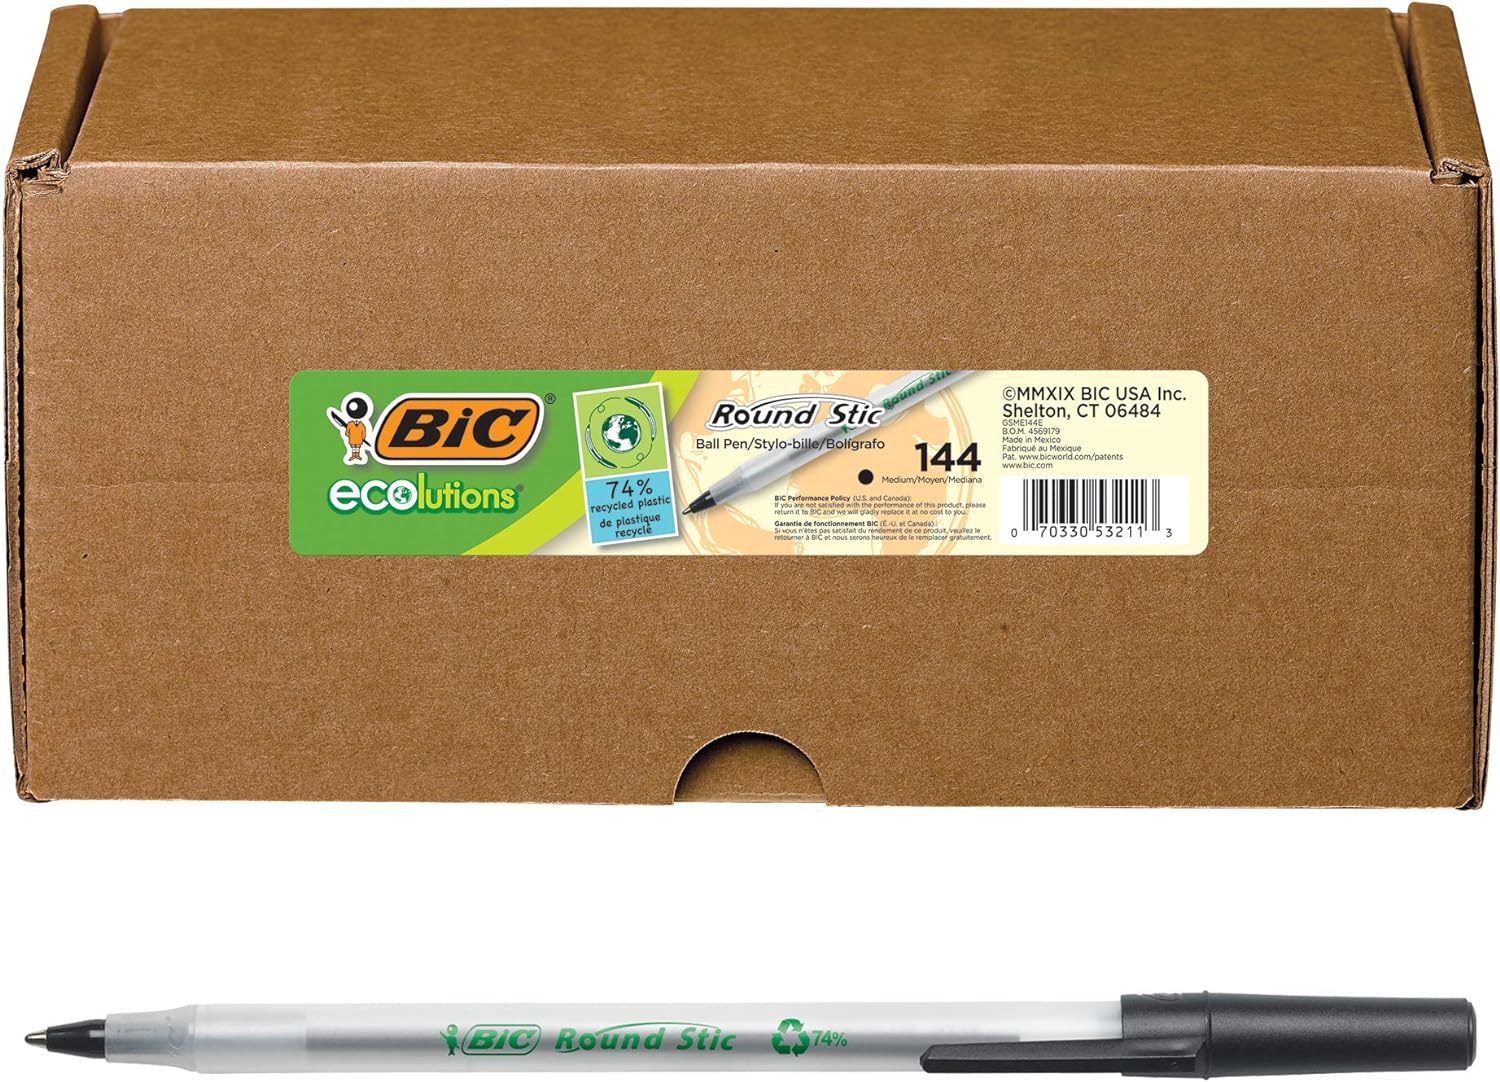 BIC Ecolutions Round Stic Ballpoint Pen, Medium Point (1.0mm), Black, 144-Count, For a Smooth Writing Experience